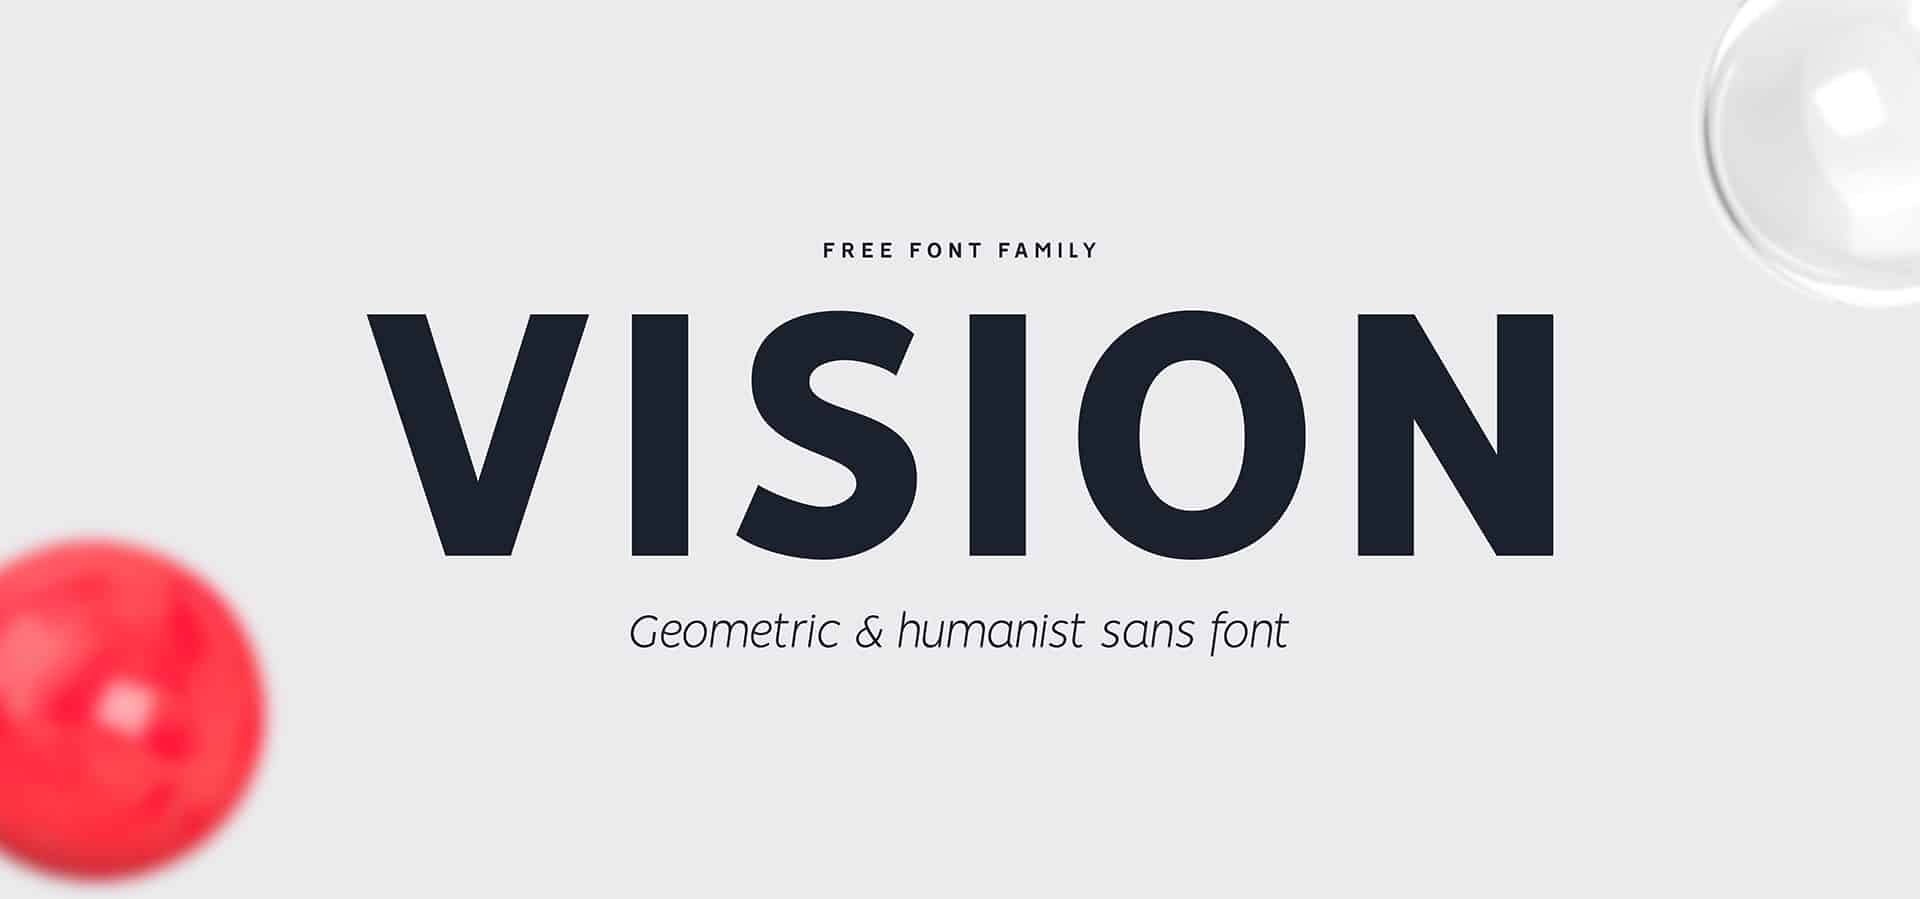 Vision free font family designed by Pixel Surplus and Bydani